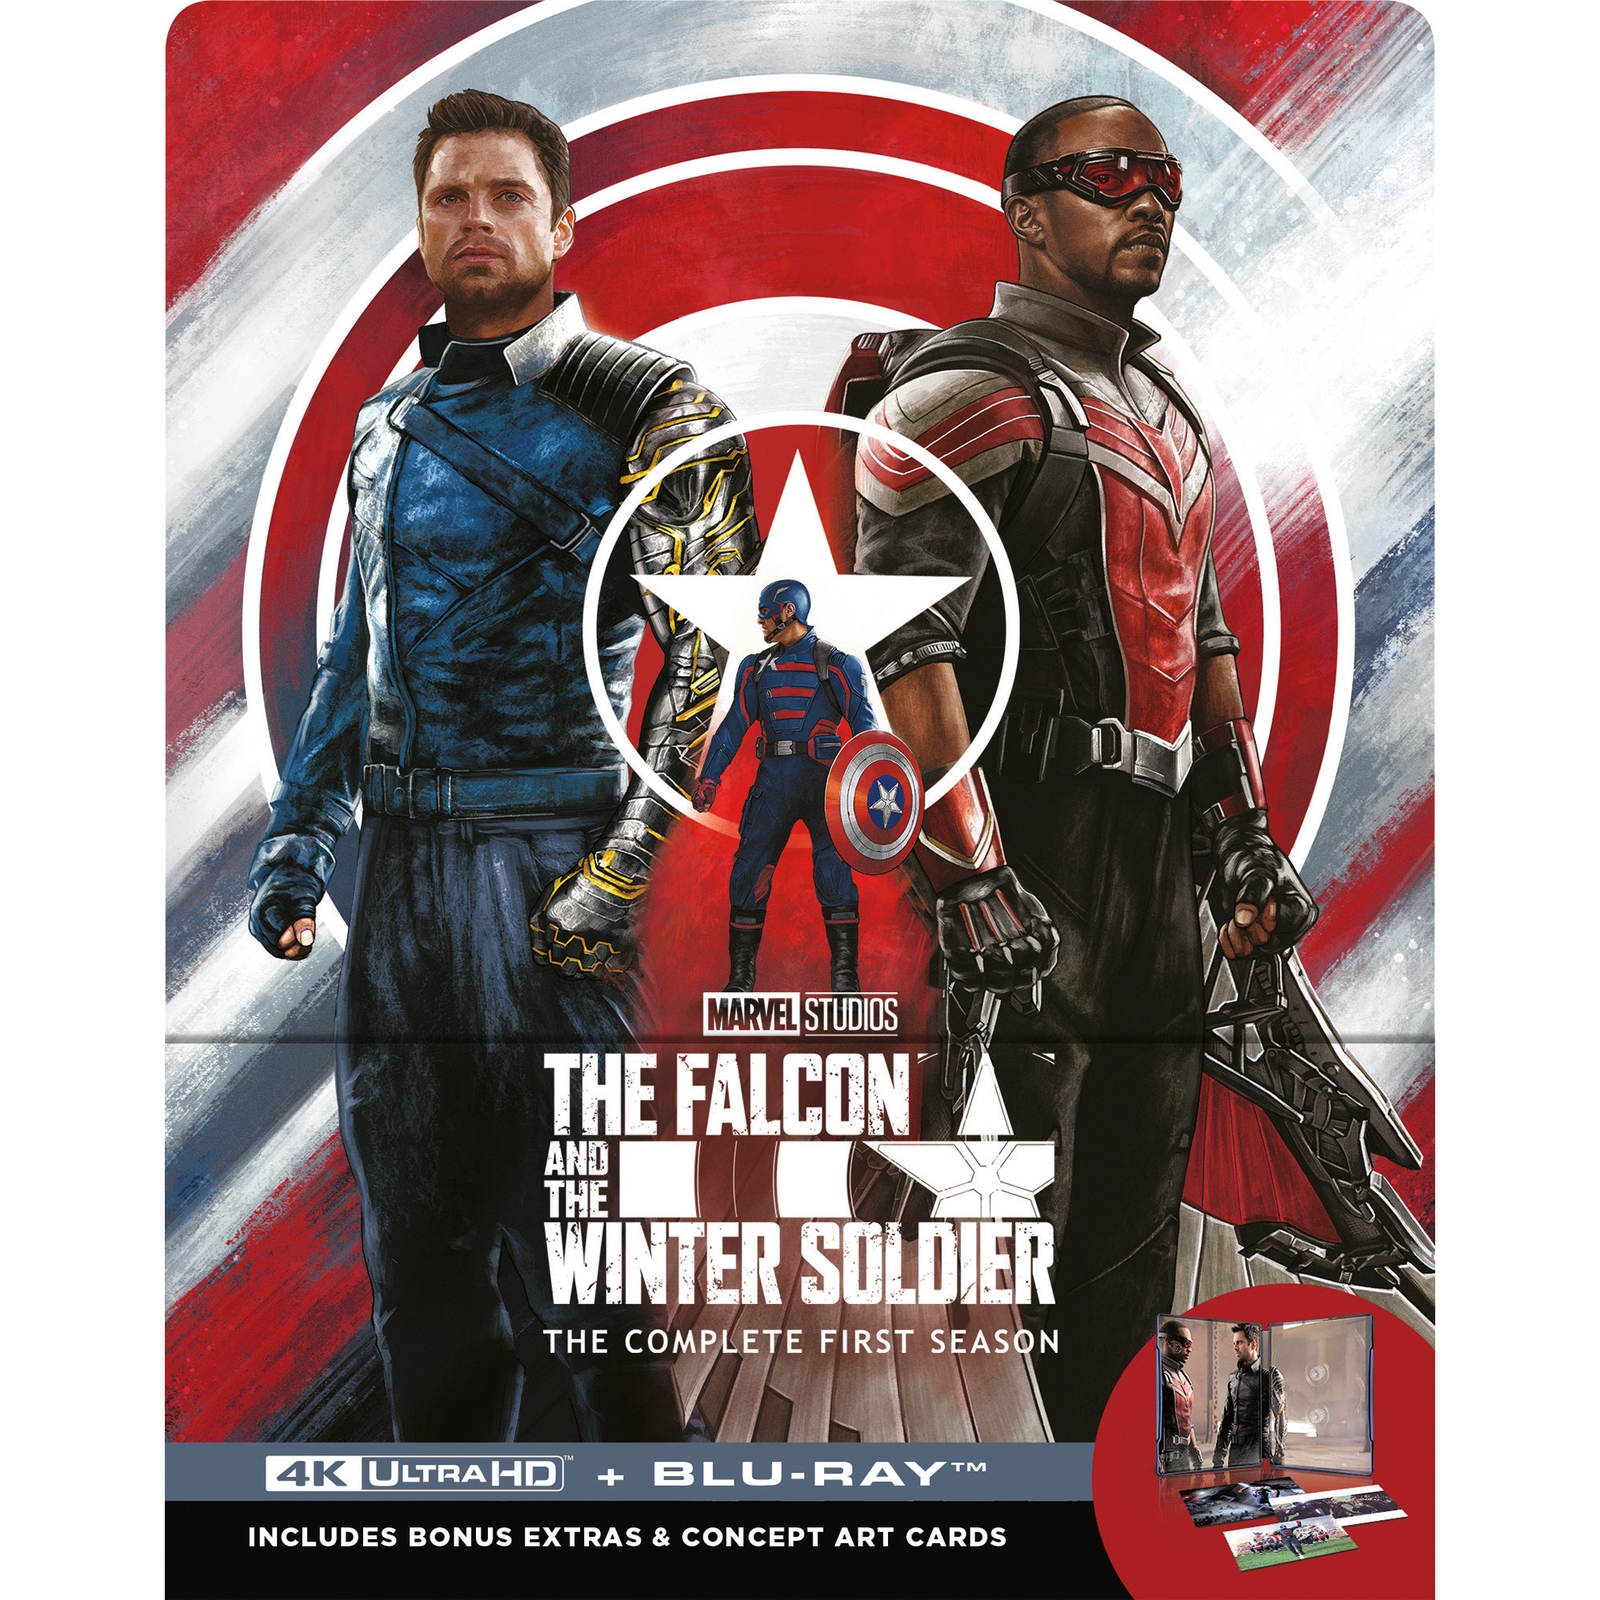 Marvel%27s The Falcon and The Winter Soldier SteelBook 4K Ultra HD & Blu-ray (Disney+ Original includes ArtCards)